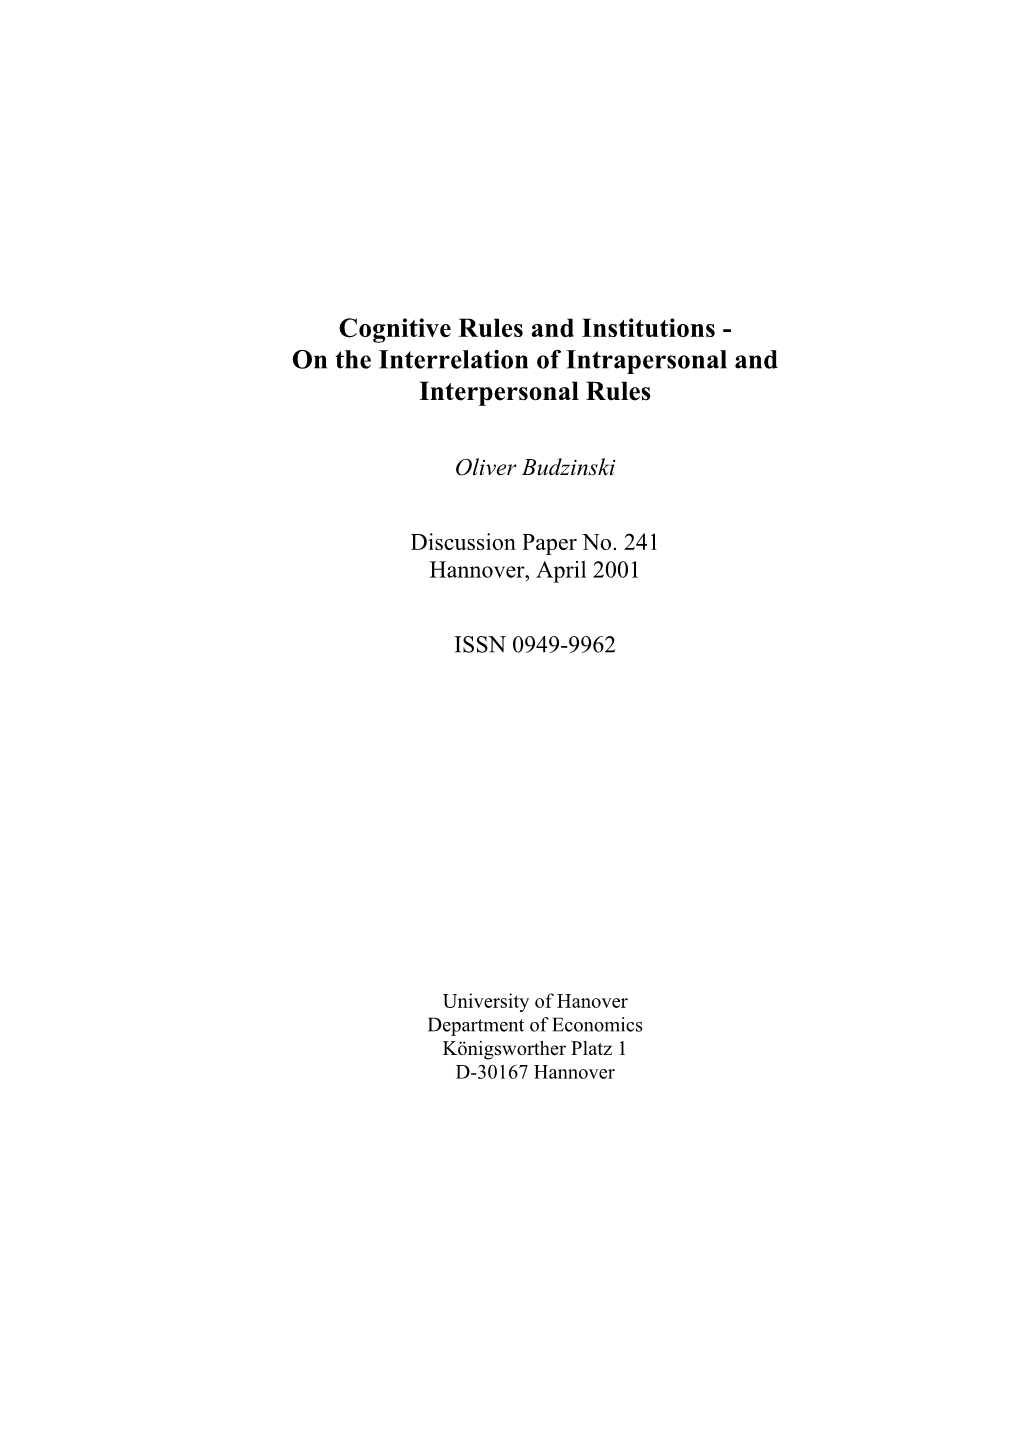 Cognitive Rules and Institutions - on the Interrelation of Intrapersonal and Interpersonal Rules